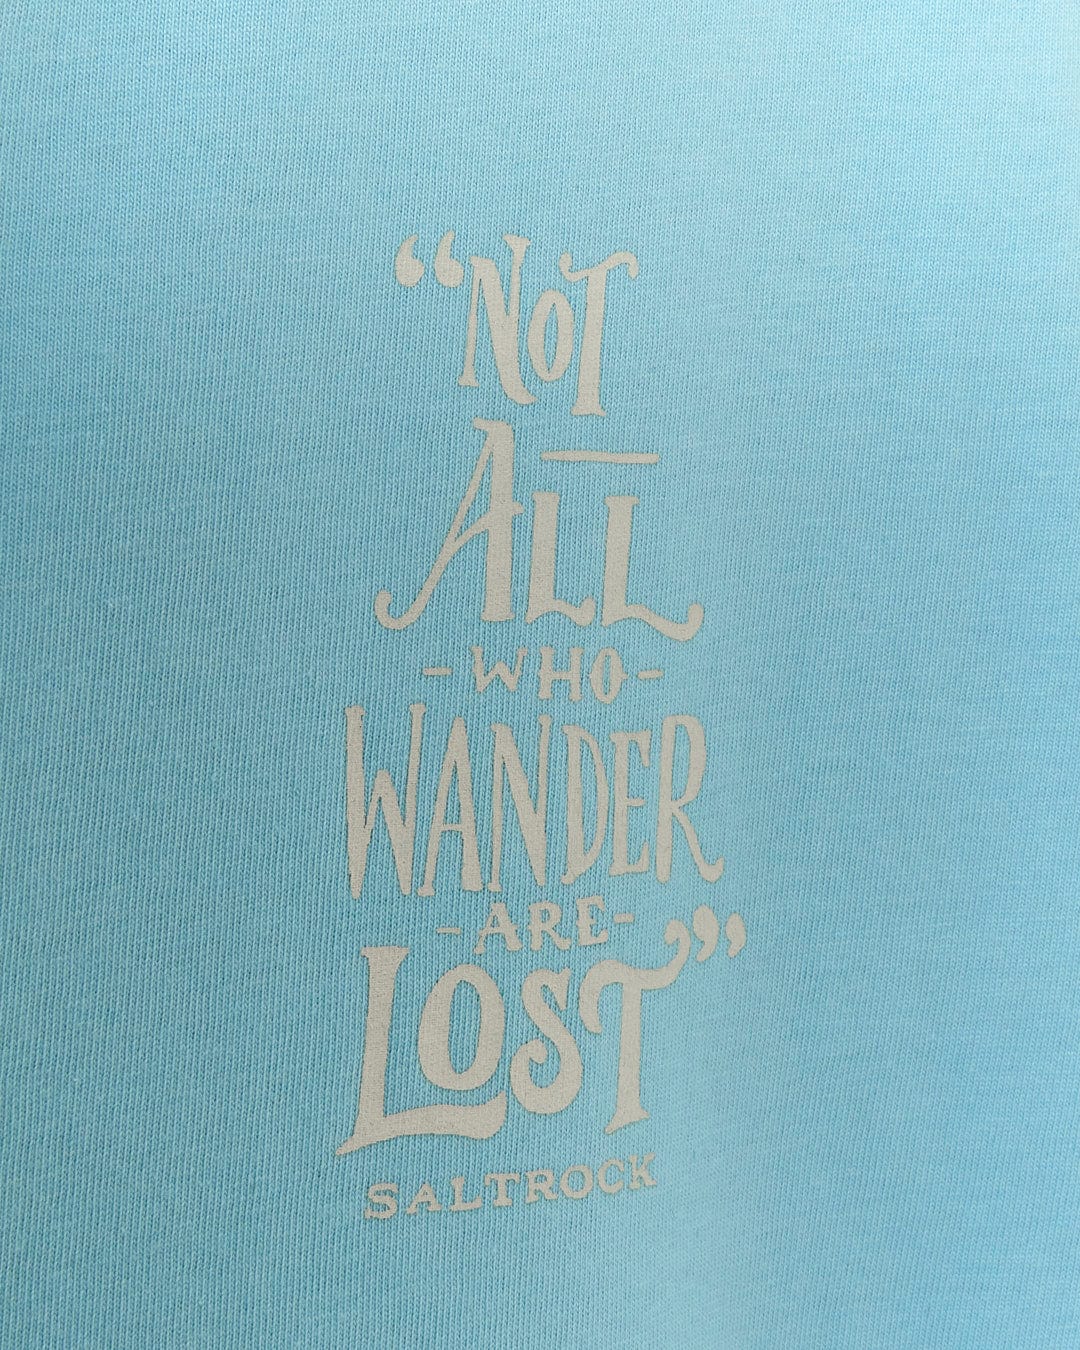 A Lost Ships tee from Saltrock, made from cotton, quoting "Not all who wander are lost".